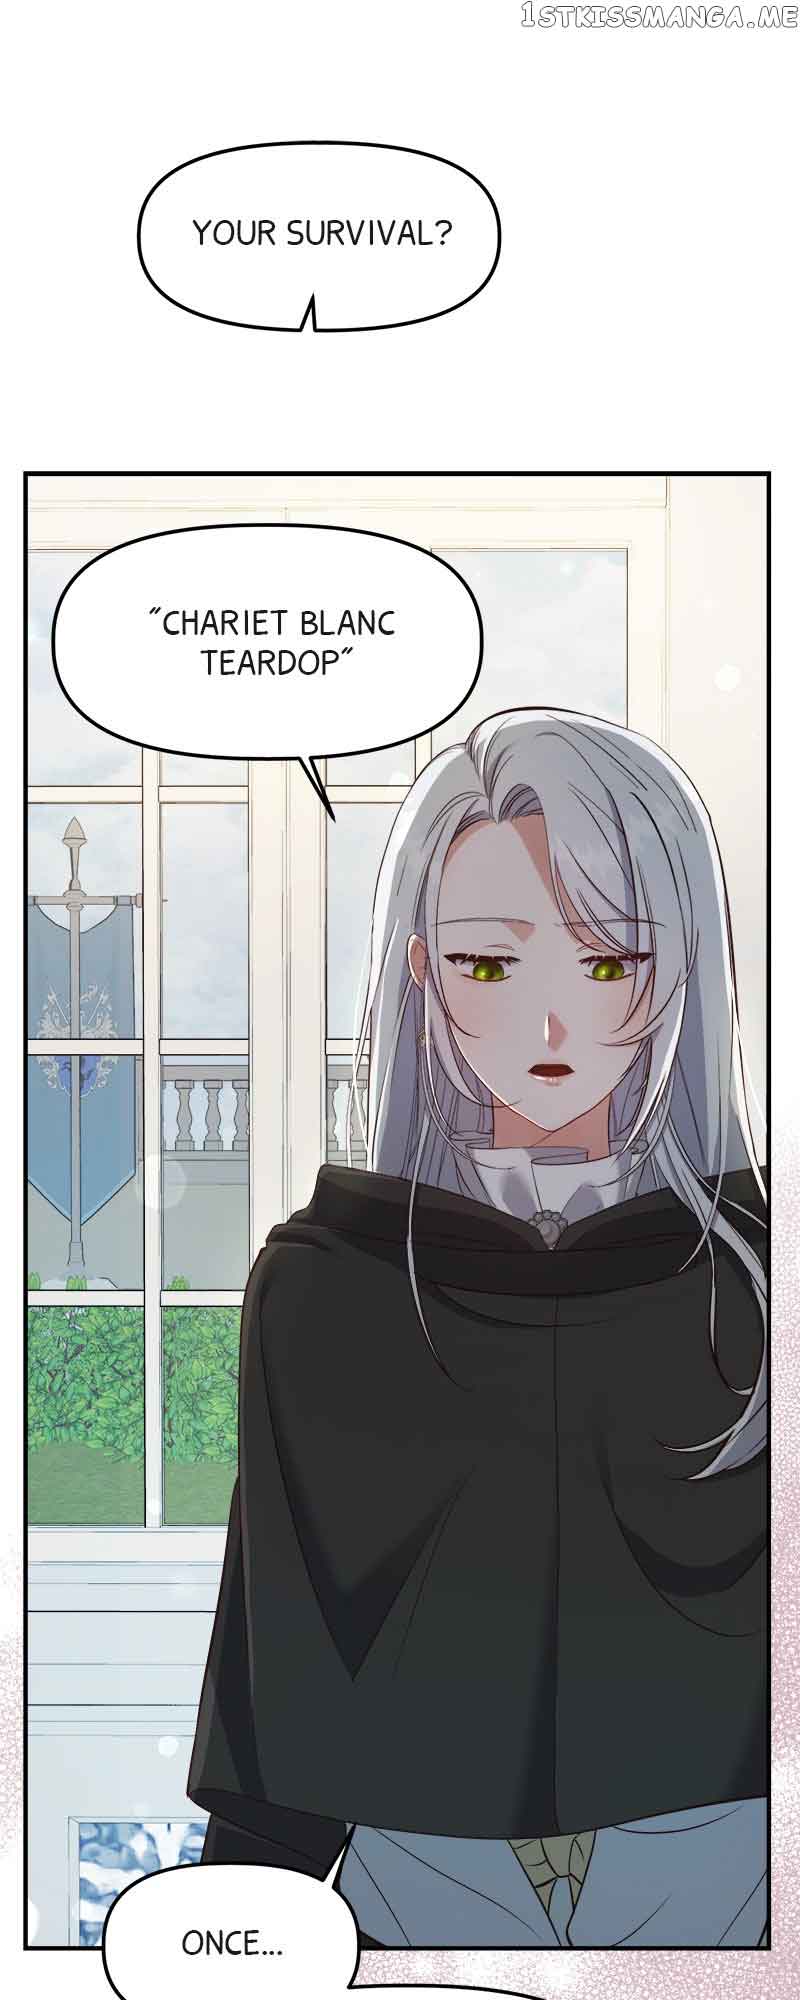 The Fake Duchess In Distresss chapter 5